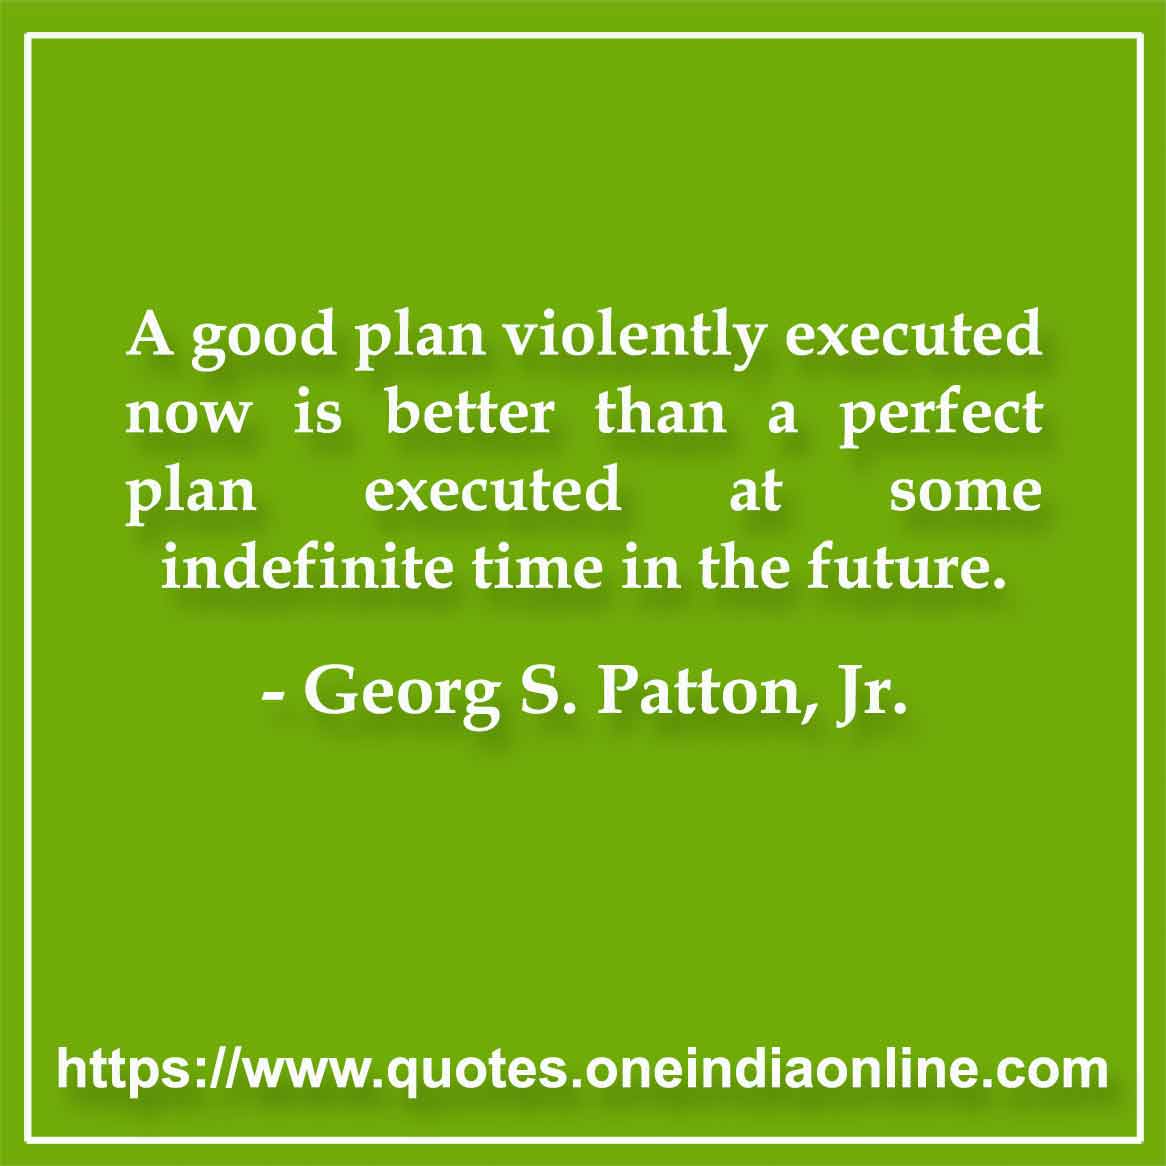 A good plan violently executed now is better than a perfect plan executed at some indefinite time in the future.

- Quotations in English by Georg S. Patton, Jr.